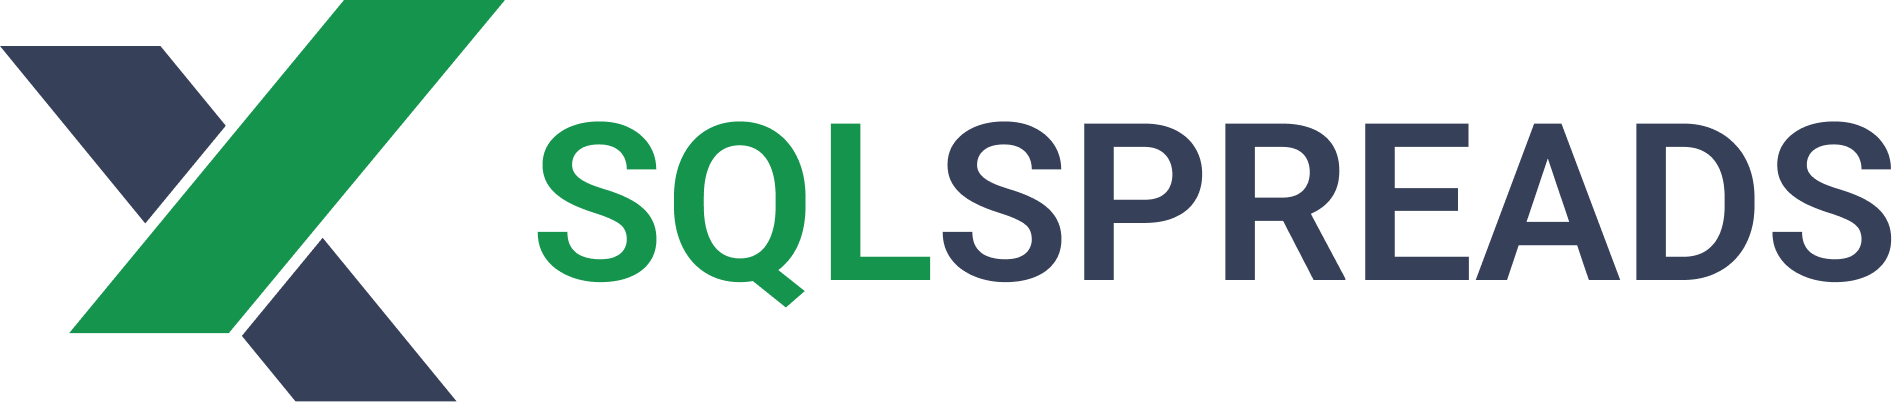 SQLspreads Logo 1900x402.png